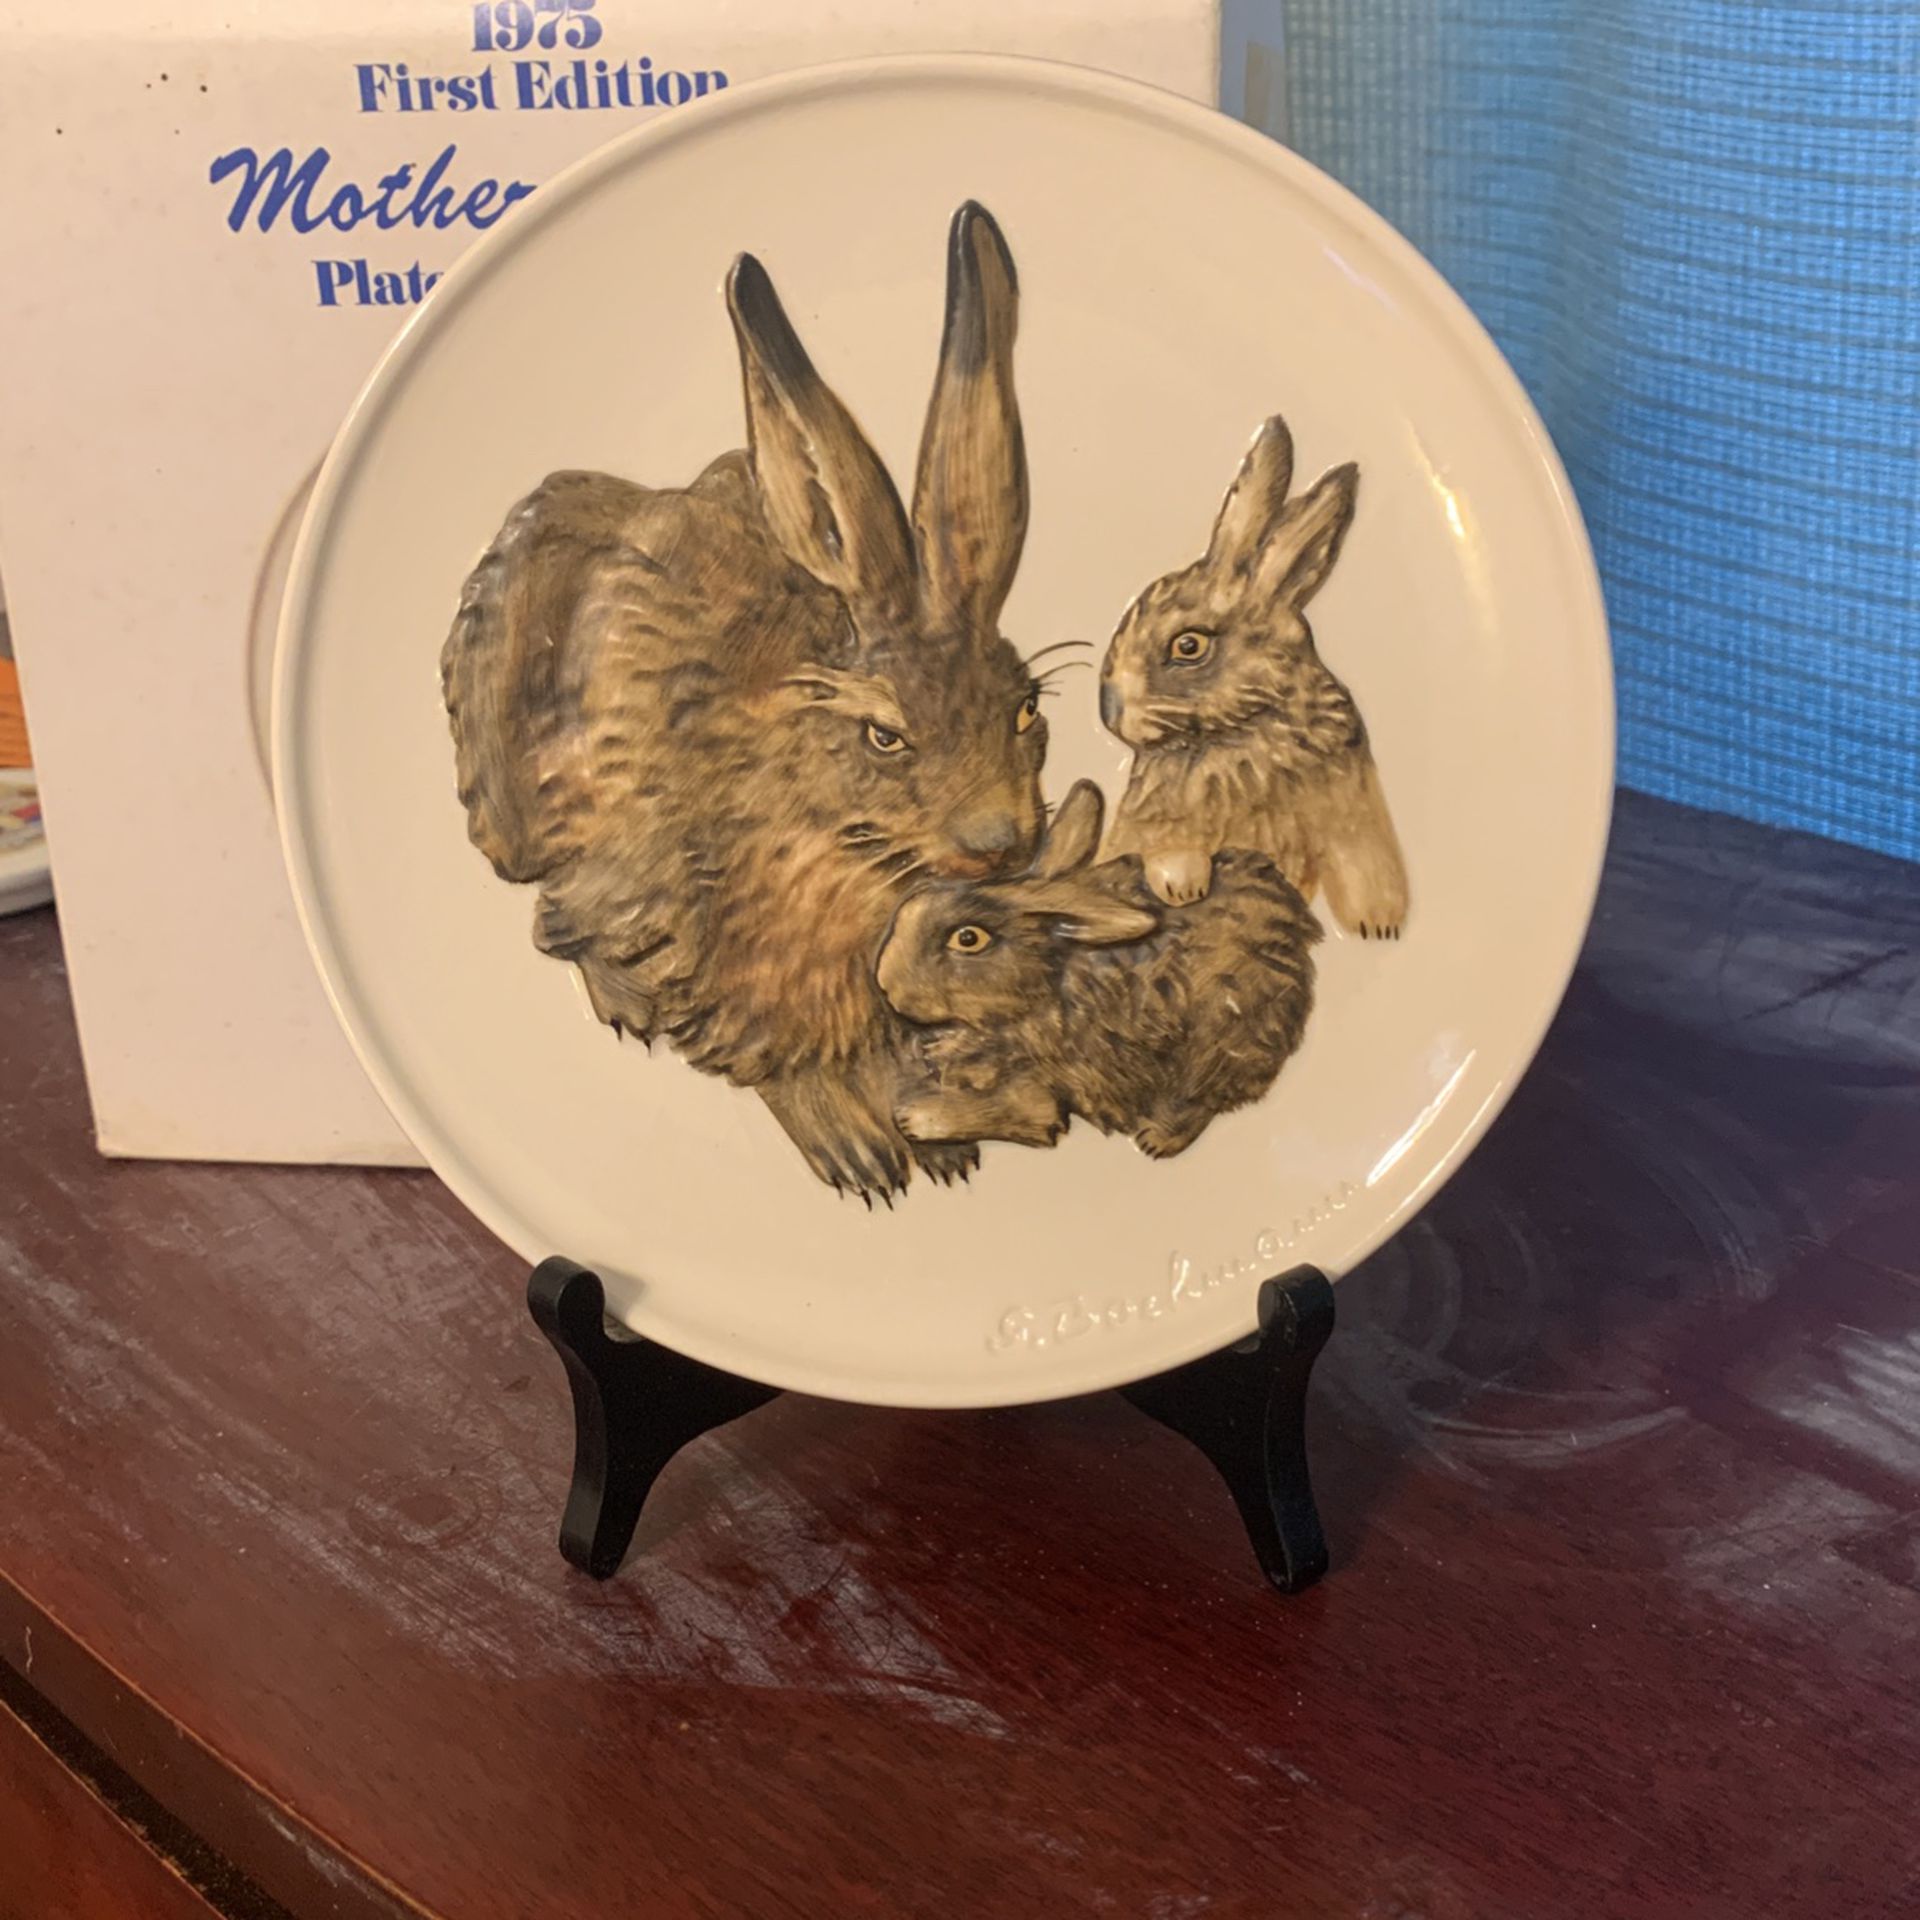 1975 First Edition “Rabbit Family” Mother’s Series 